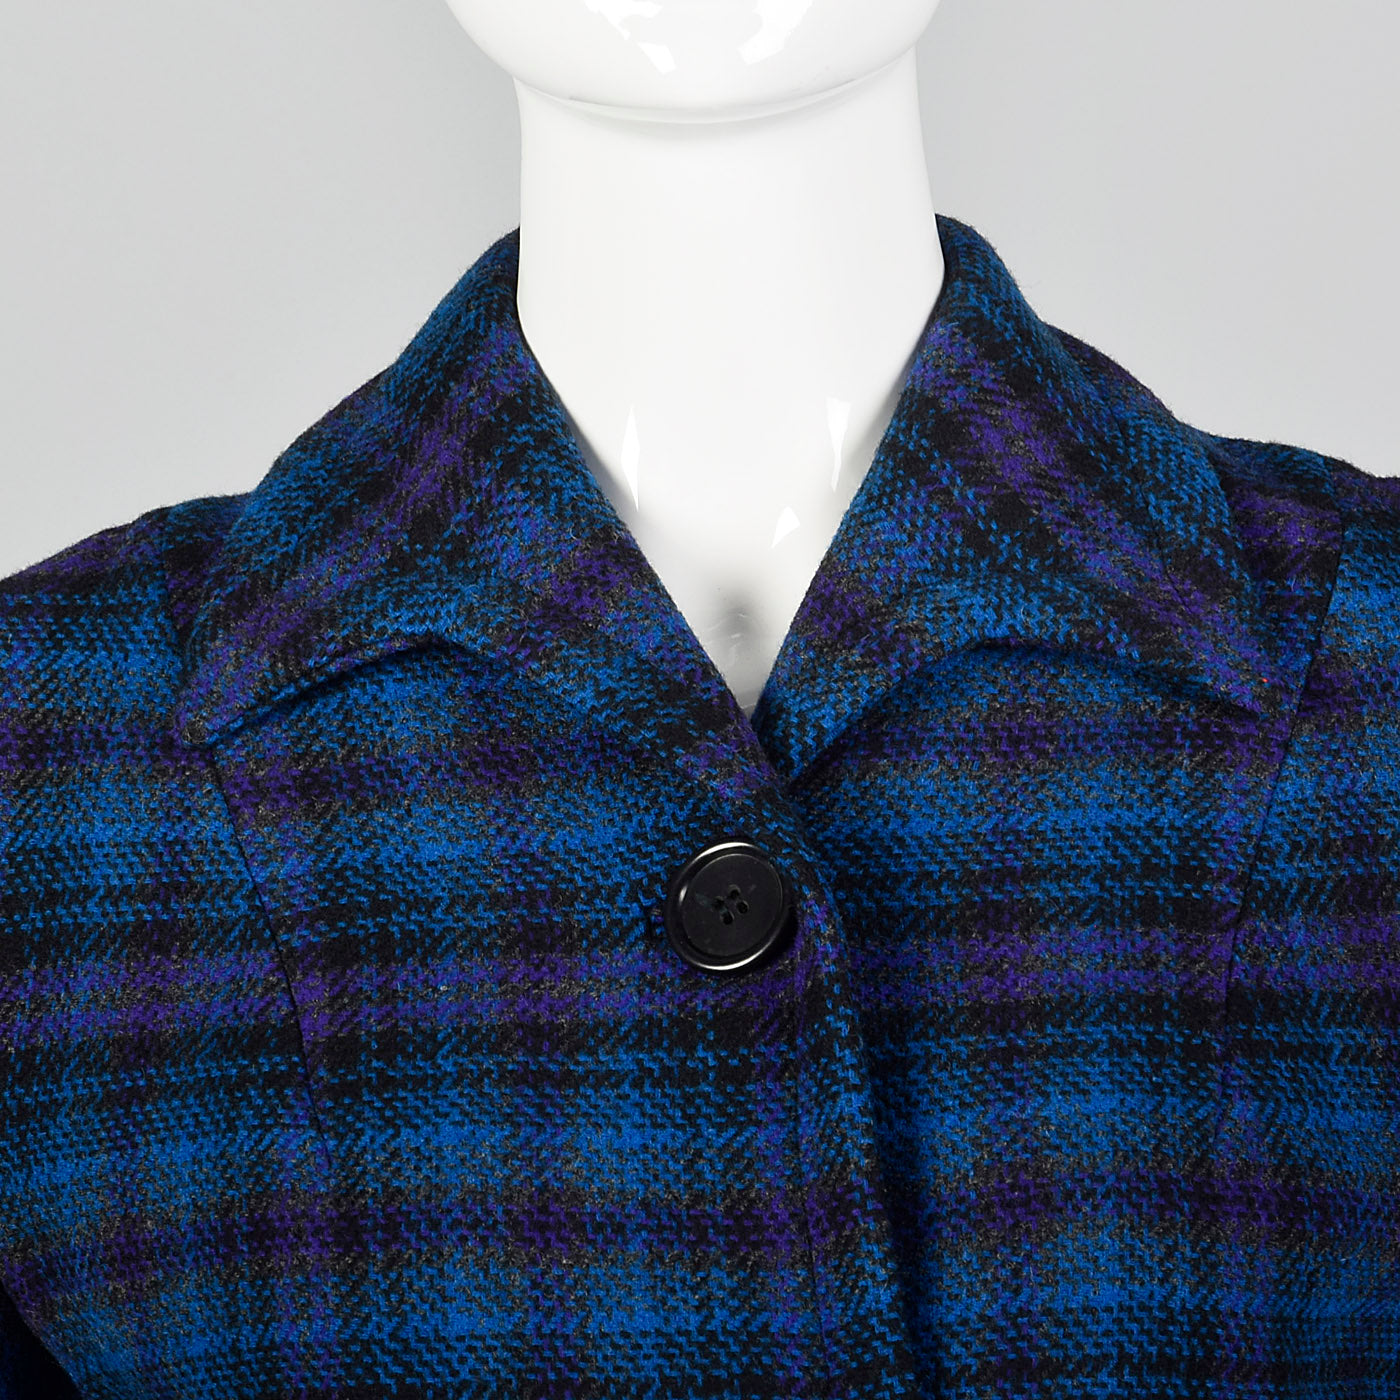 1960s Pendleton Wool Skirt Suit in Blue and Purple Plaid